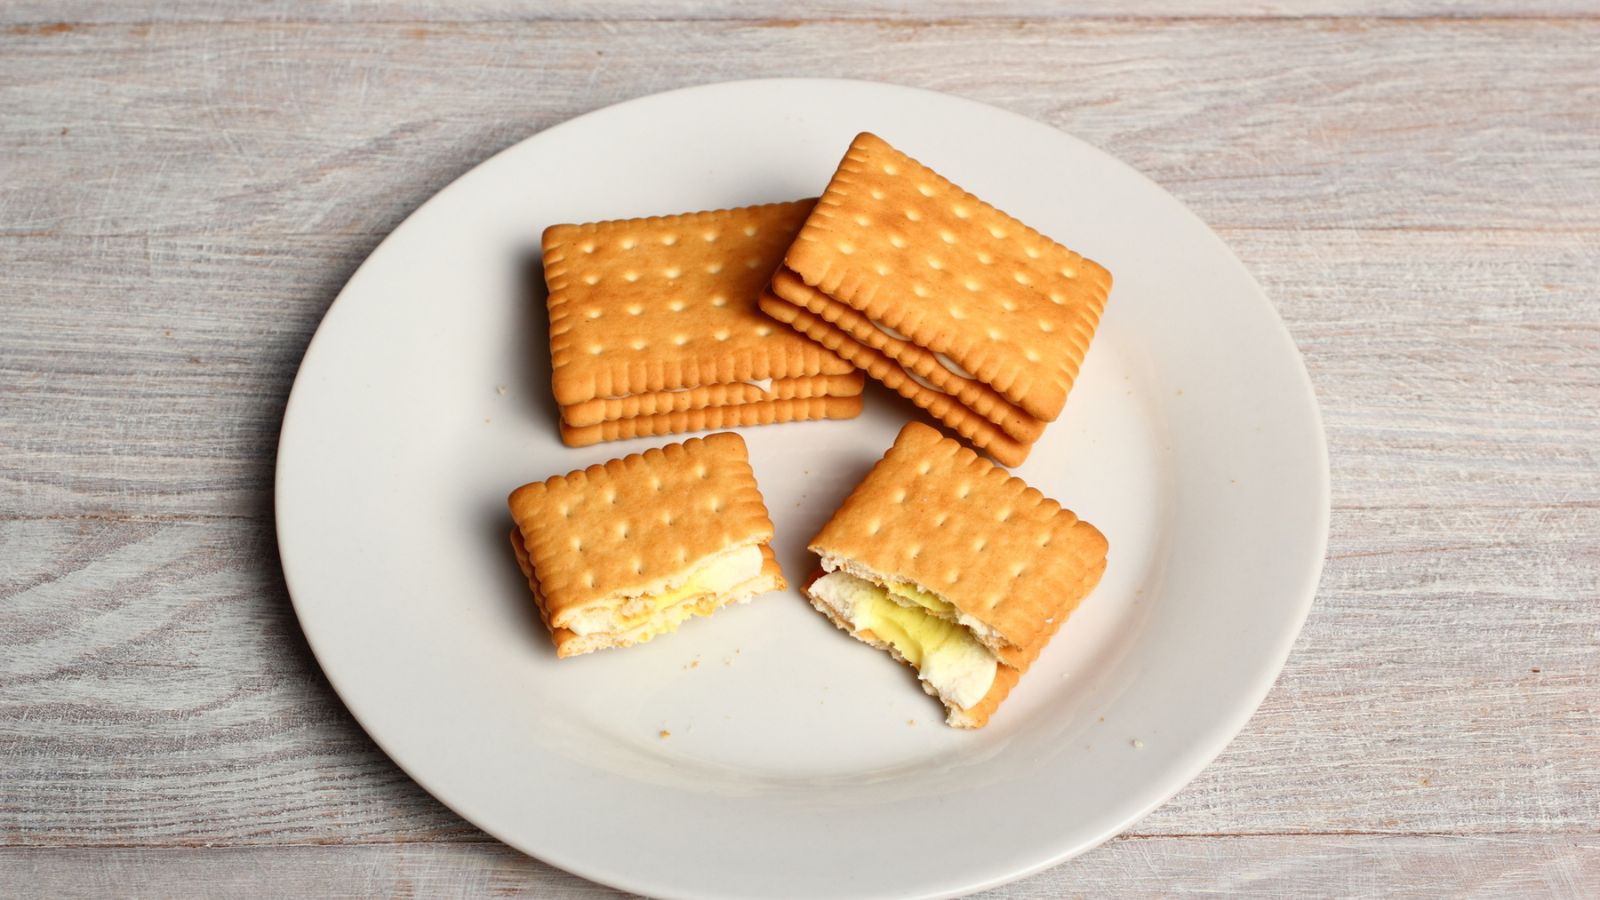 15 Retro Foods From Our Childhood That Immediately Makes Us Nostalgic